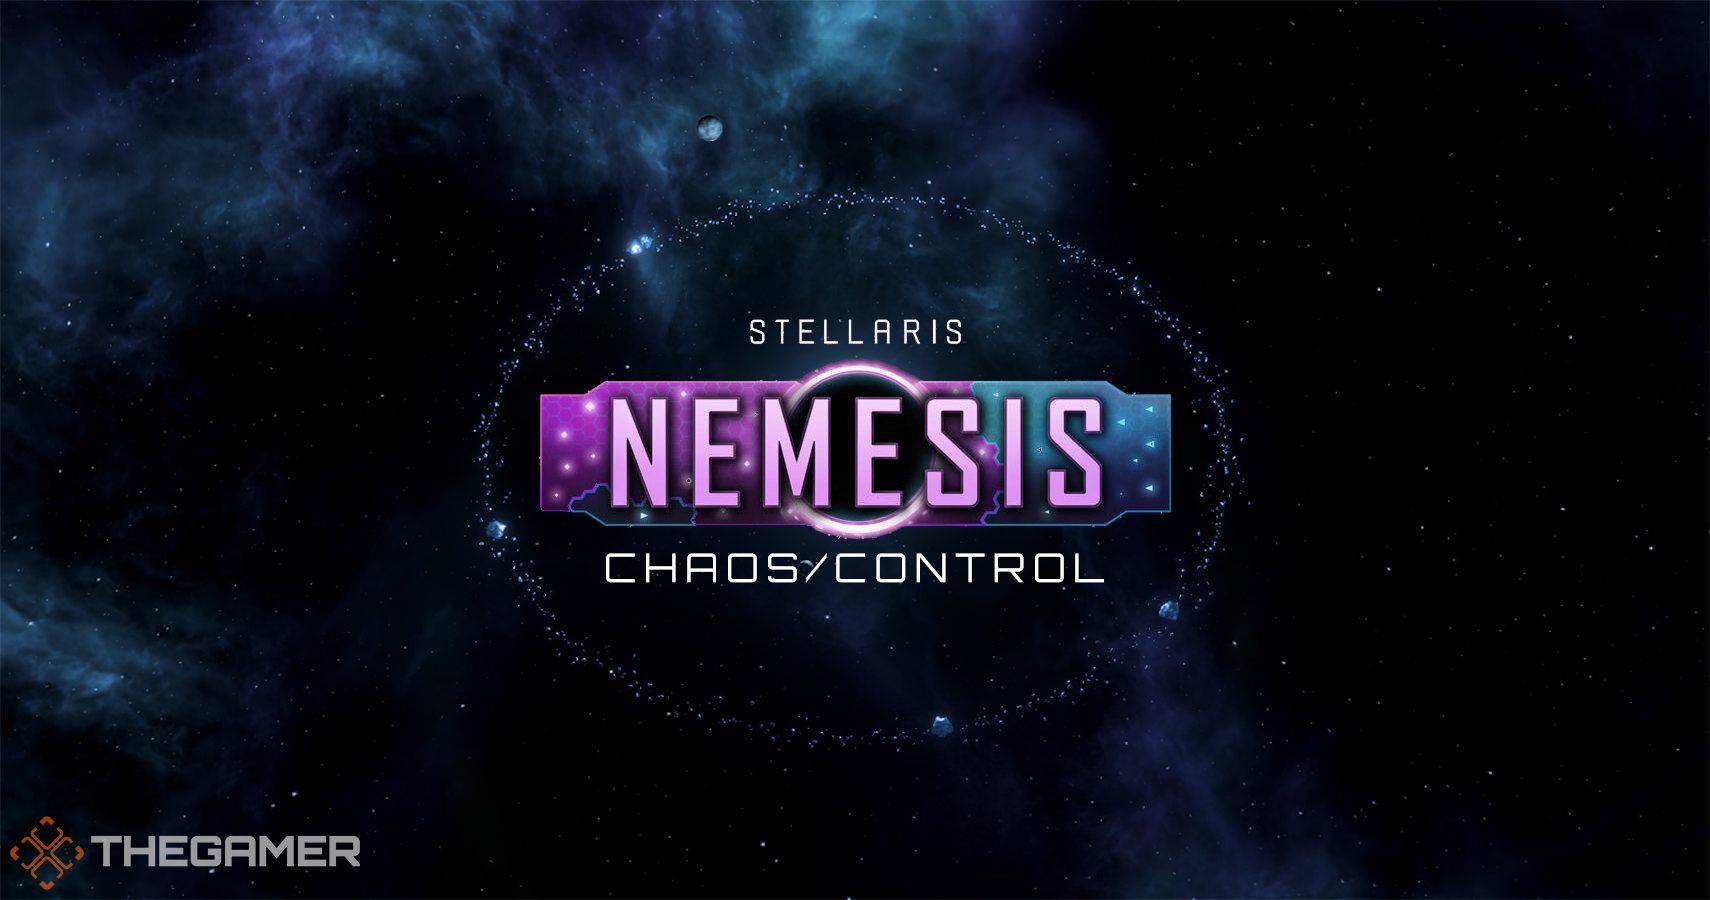 Stellaris Nemesis Expansion Lets You Choose Between Chaos And Control